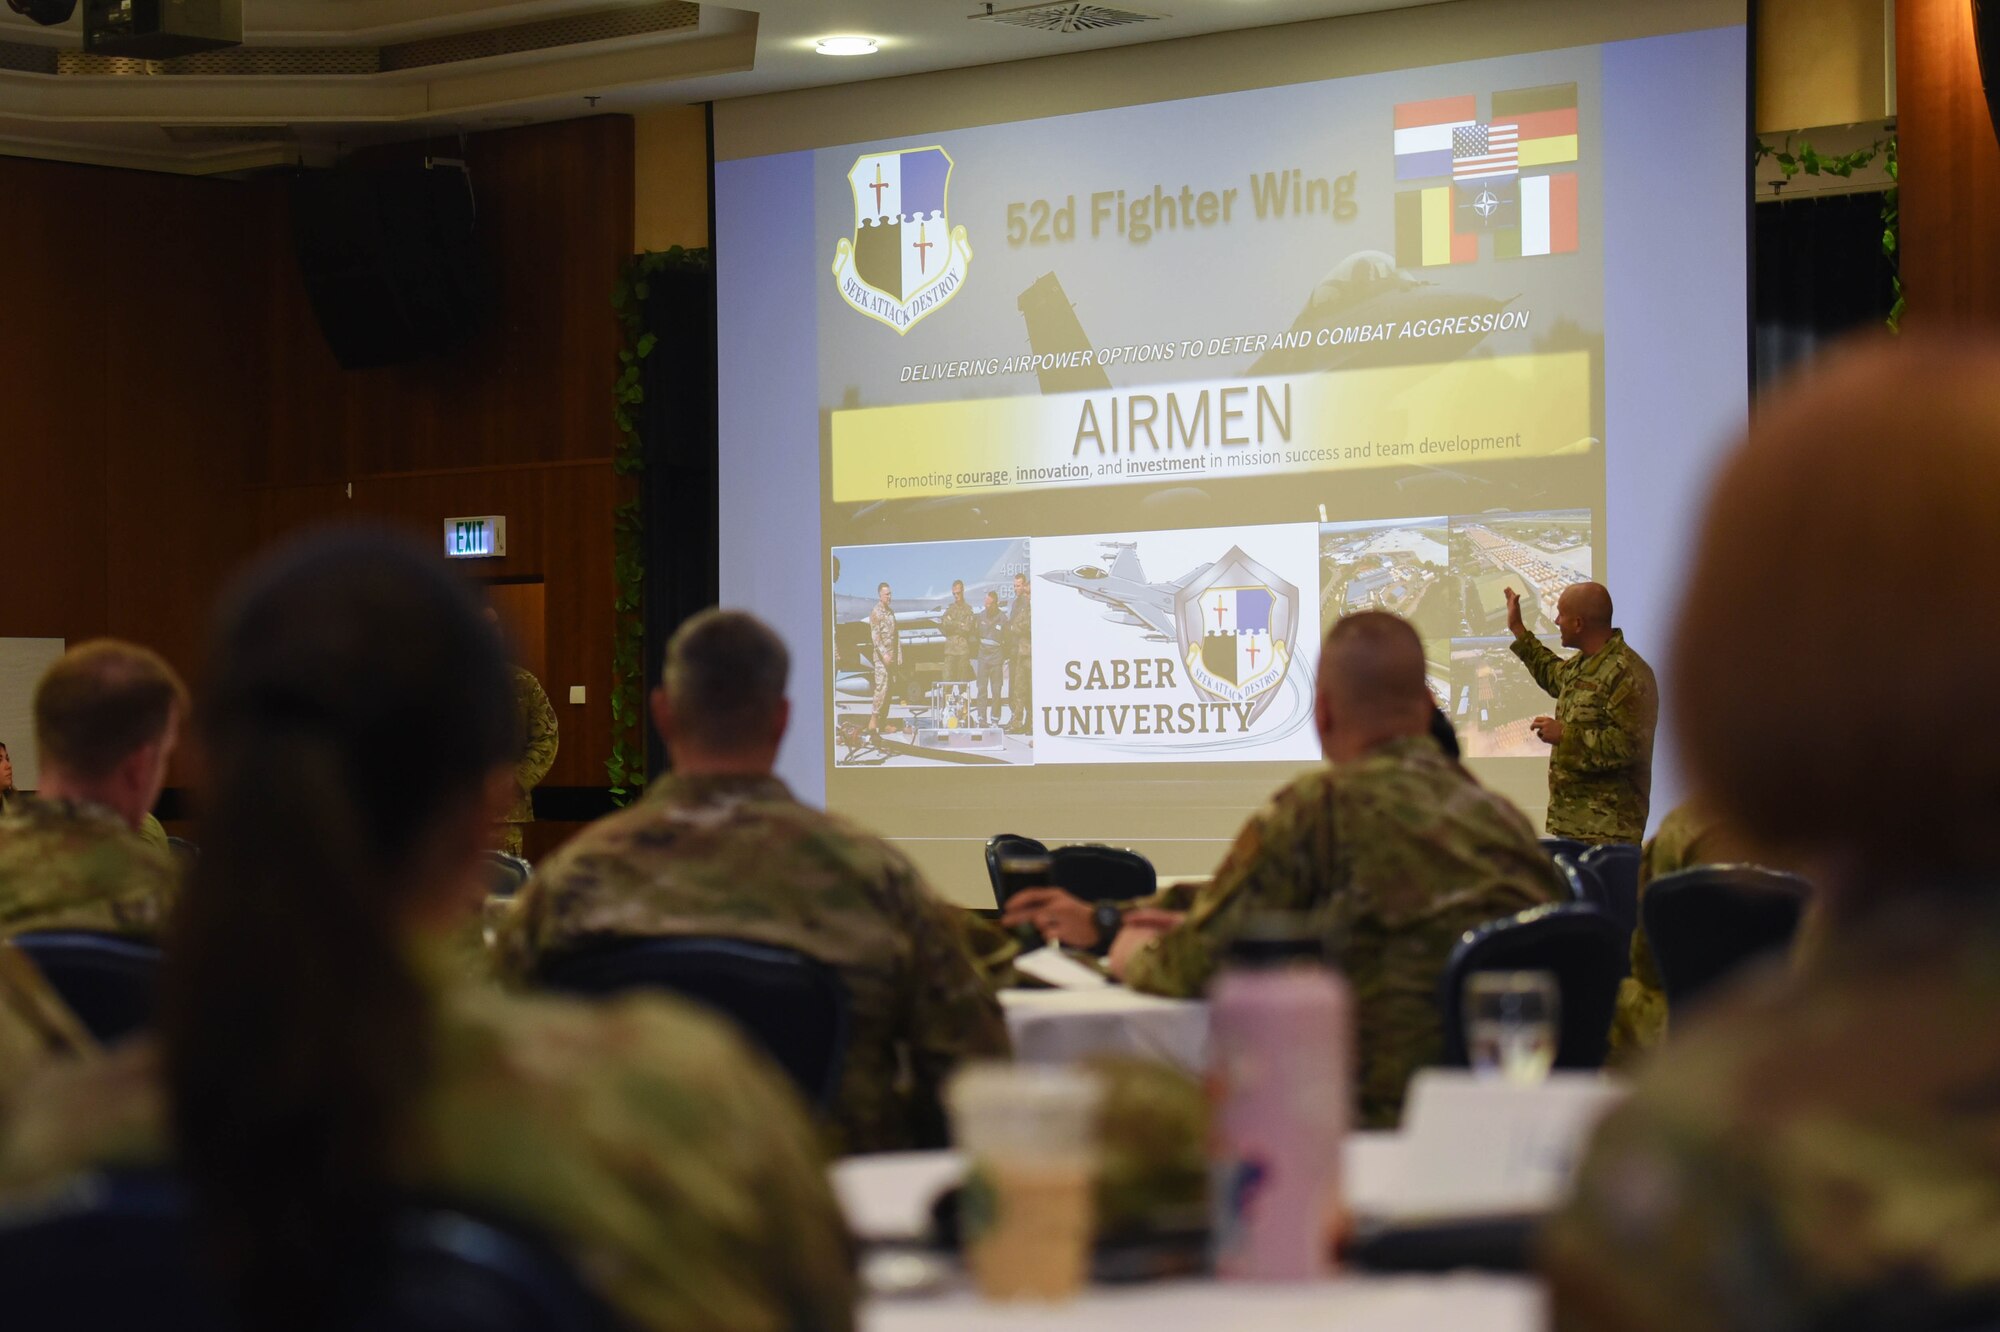 U.S. Air Force Chief Master Sgt. Toby Roach, 52nd Fighter Wing command chief gives a speech during the Key Spouse Symposium on Spangdahlem Air Base, Germany, May 25, 2022. Spangdahlem has over 80 Key Spouses, including Key Spouse Mentors, that aid in helping military spouses on base.
(U.S. Air Force photo by Airman 1st Class Imani West)